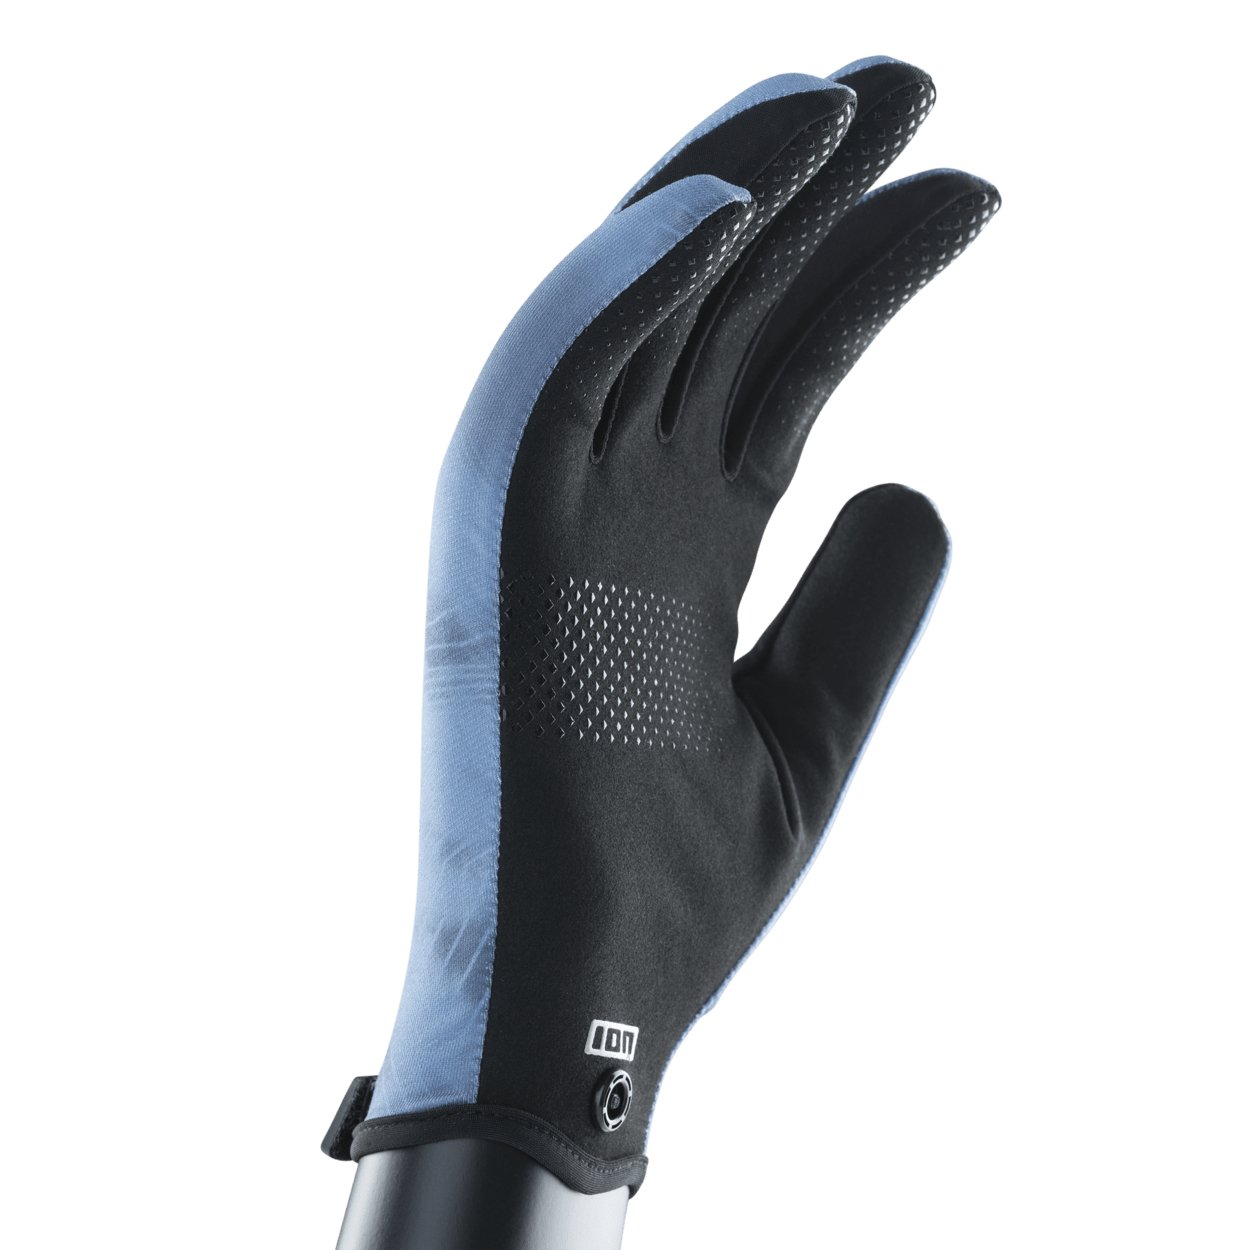 ION Gloves Amara Full Finger unisex 2023 - Worthing Watersports - 9010583128382 - Neo Accessories - ION Water